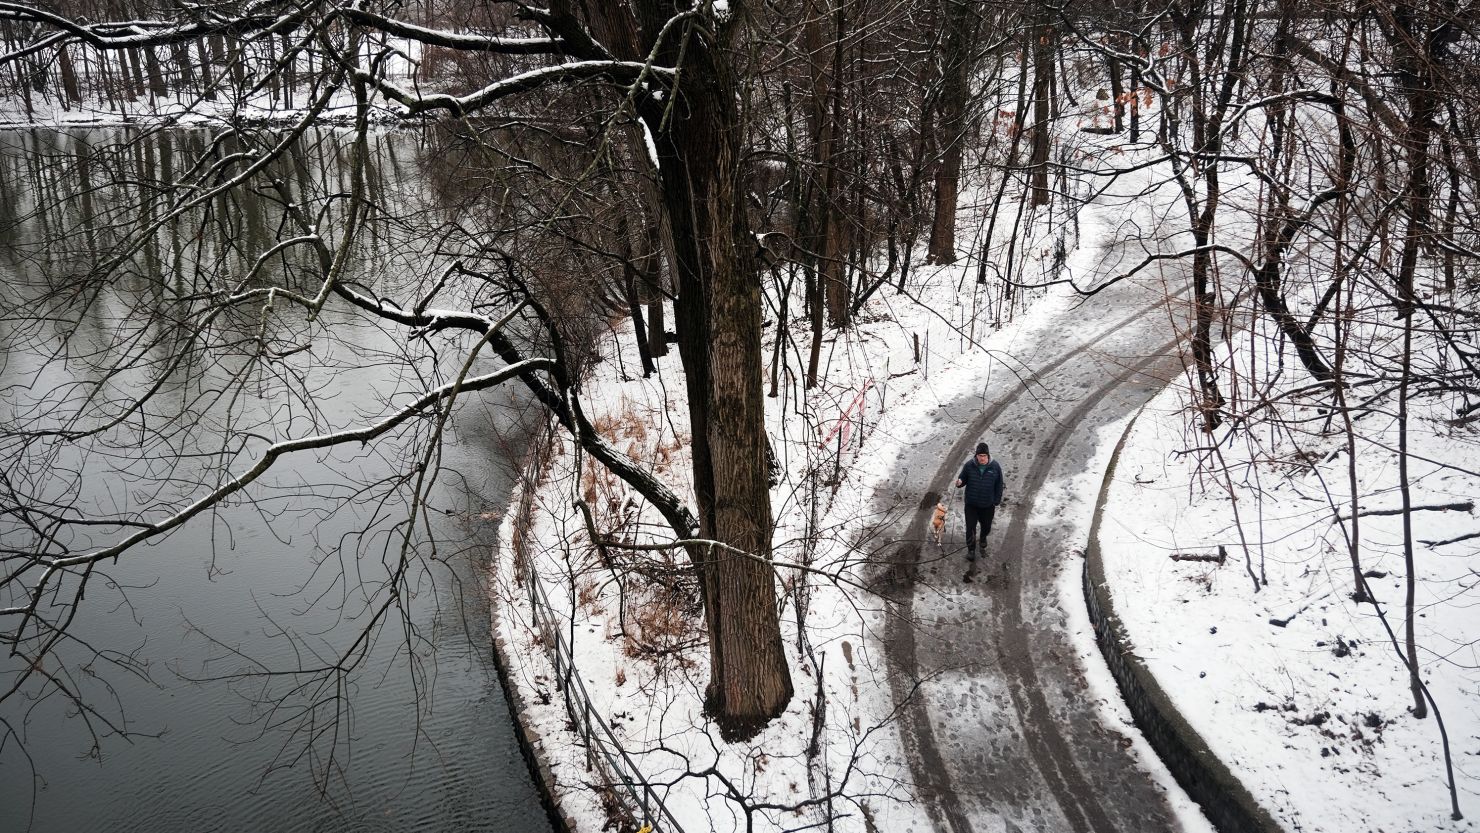 People walk through Brooklyn's Prospect Park on a snowy morning over on February 28, 2023 in New York City.